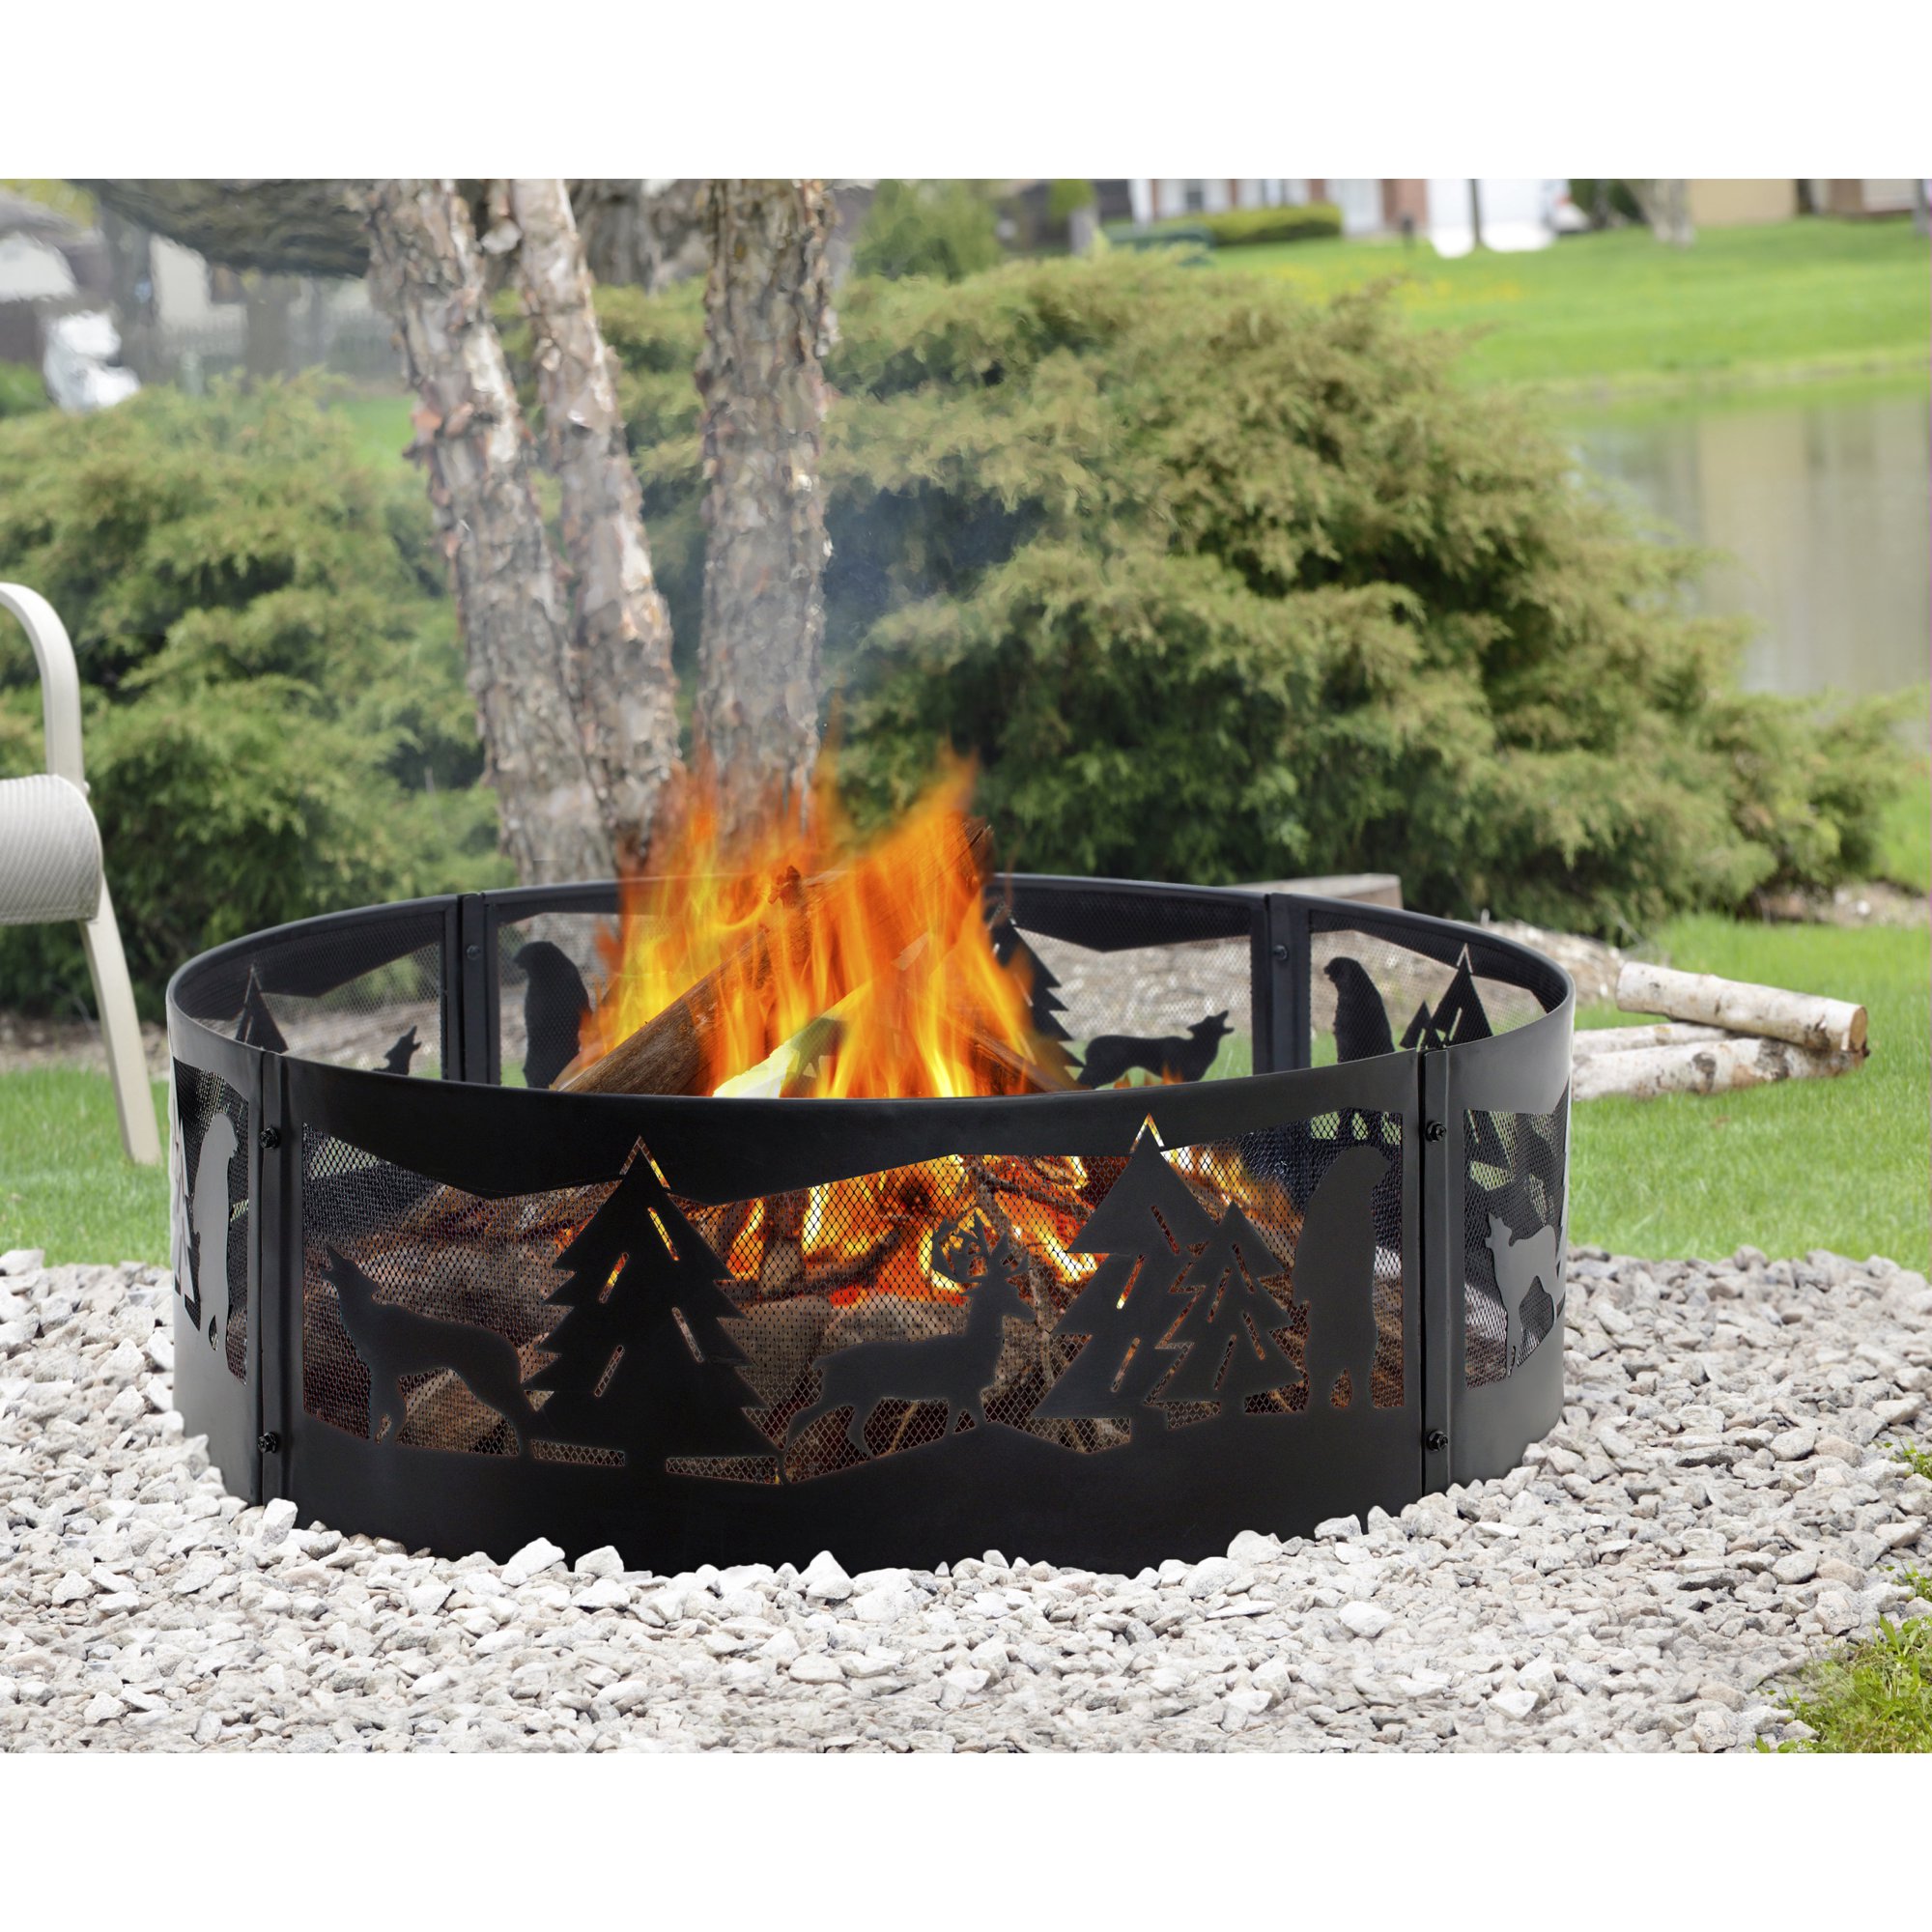 36" Pleasant Hearth Wilderness Fire Ring $23.62 + free shipping w/ Prime or on orders over $25